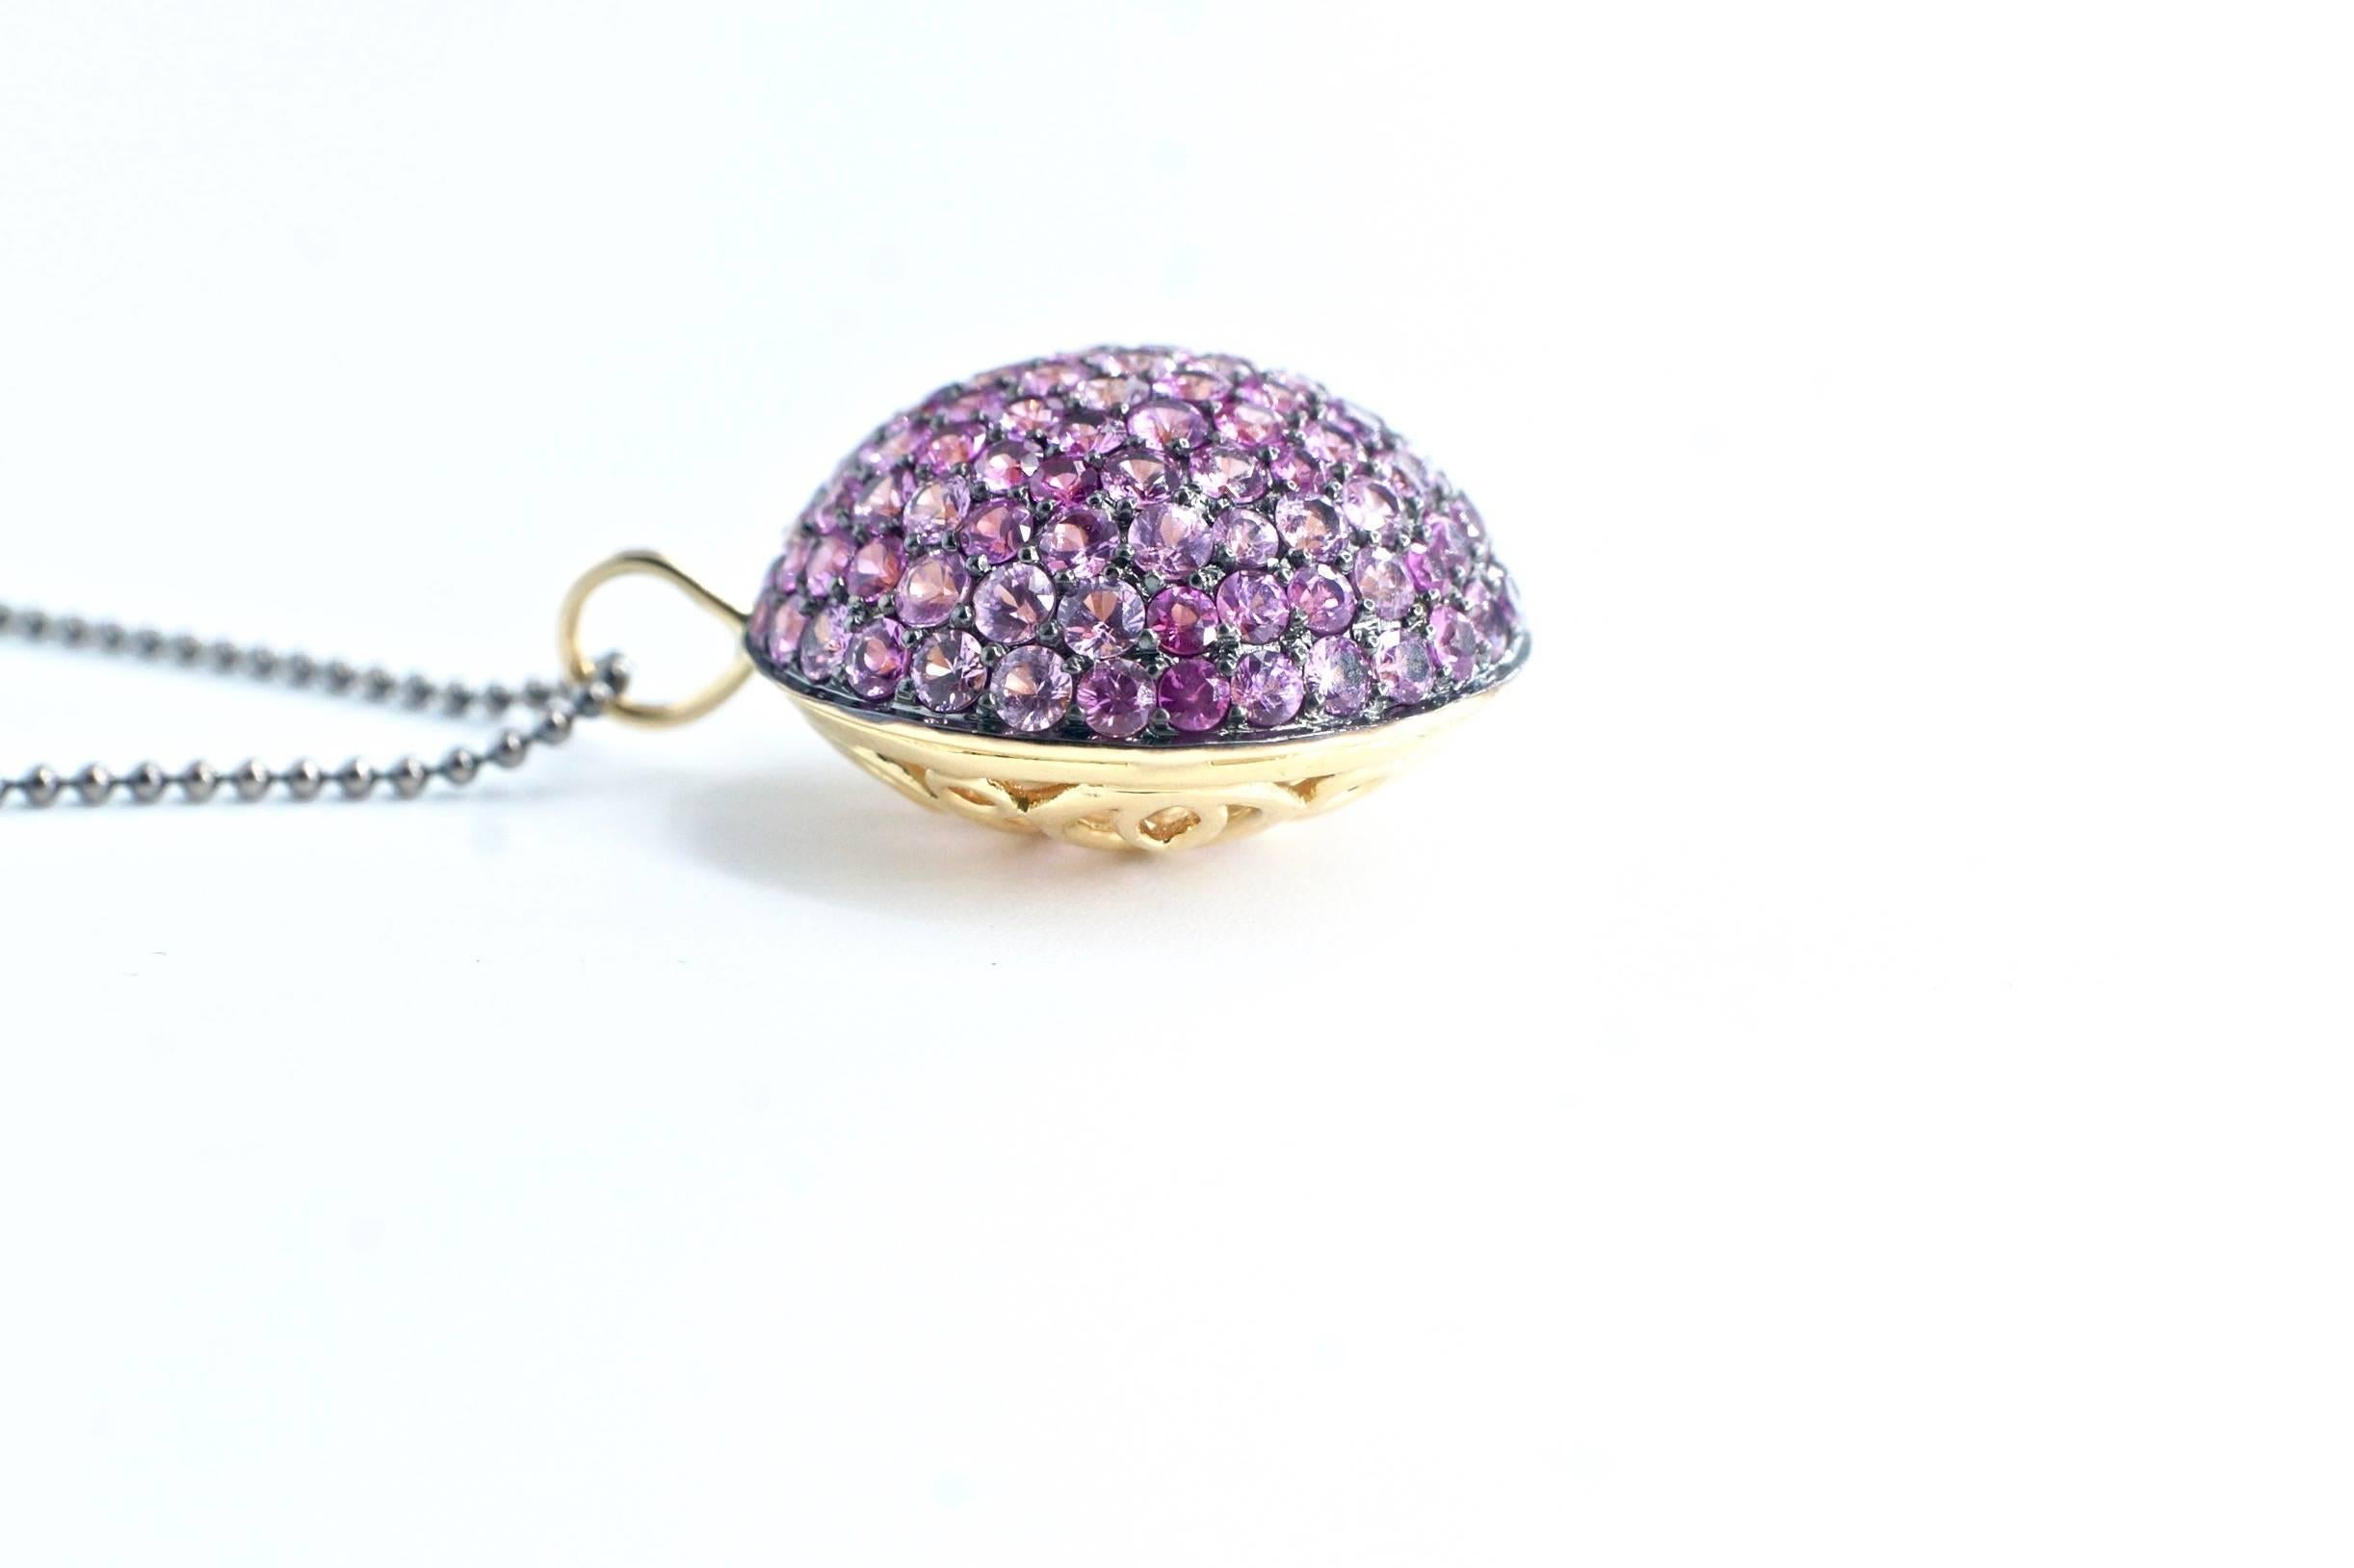 Pink Sapphire Lentil Pendant
A thirty-one-inch blackened white gold bead chain suspending a single eighteen-karat yellow gold pendant. The bombe pendant is set completely with pink sapphires on one side, while the verso consists of intricately